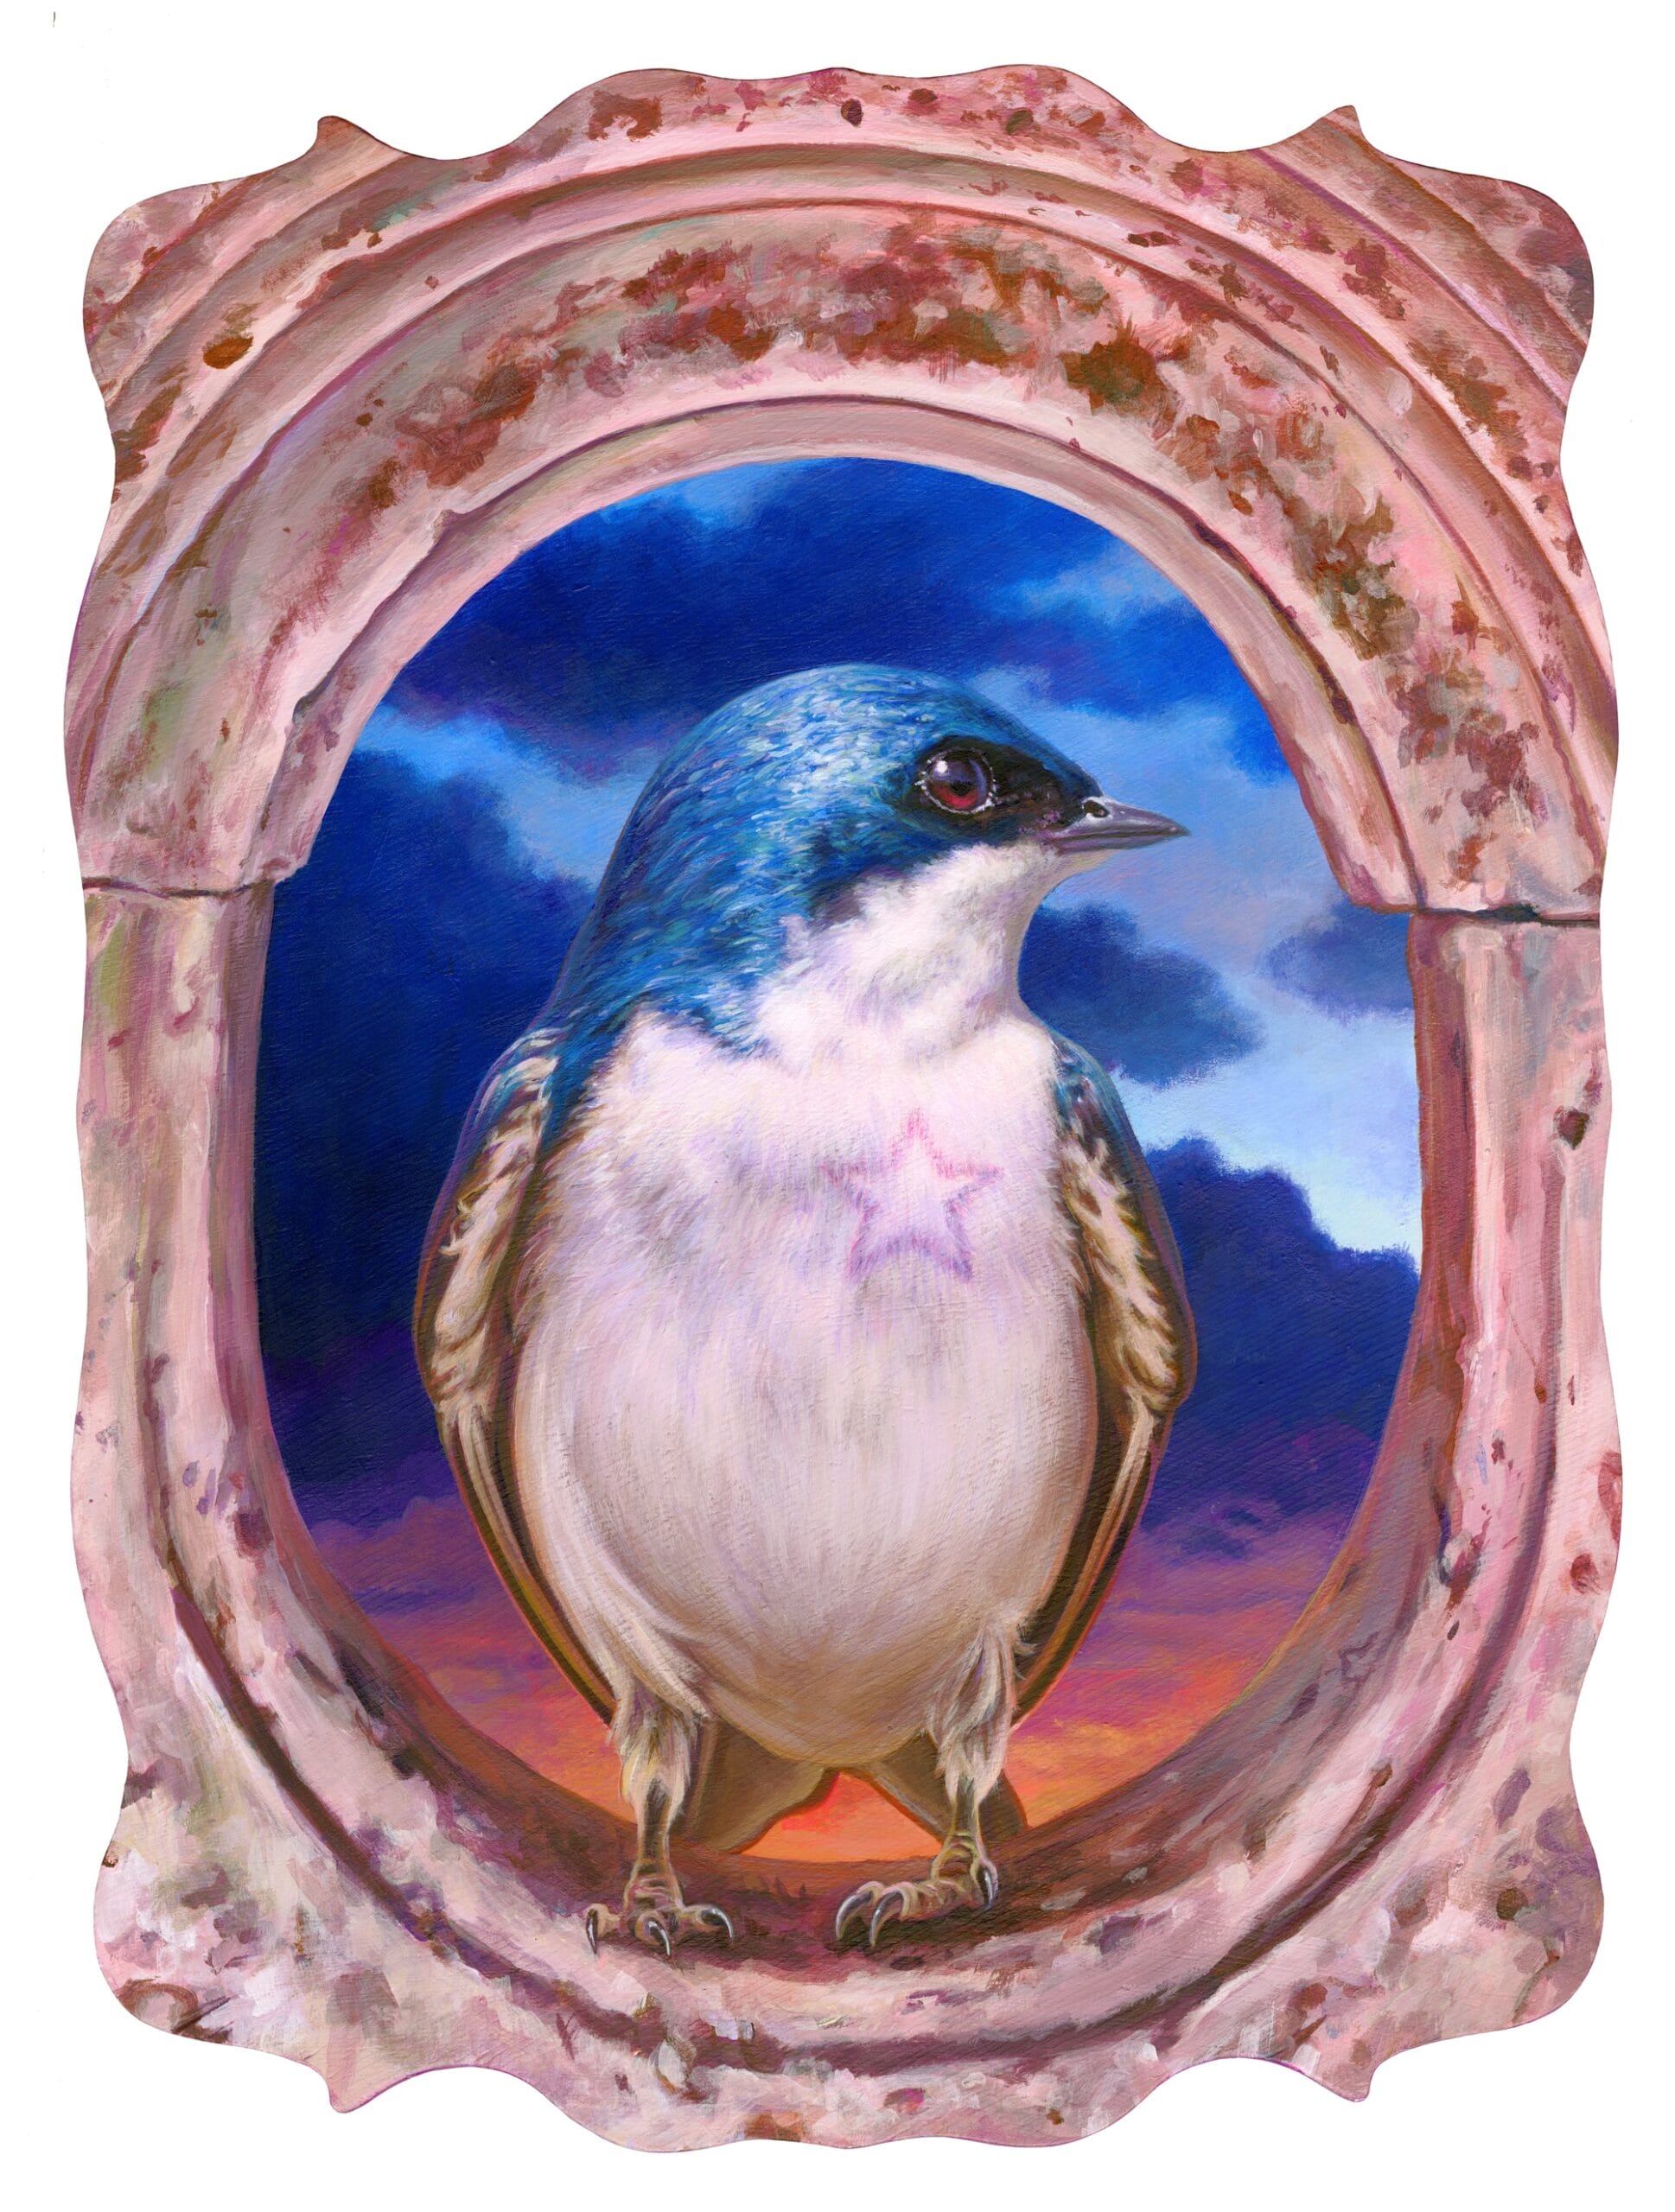 an acrylic painting on a wood panel of a bluebird with a star on its breast, perched in a painted frame, which has been cut and shaped around the edges